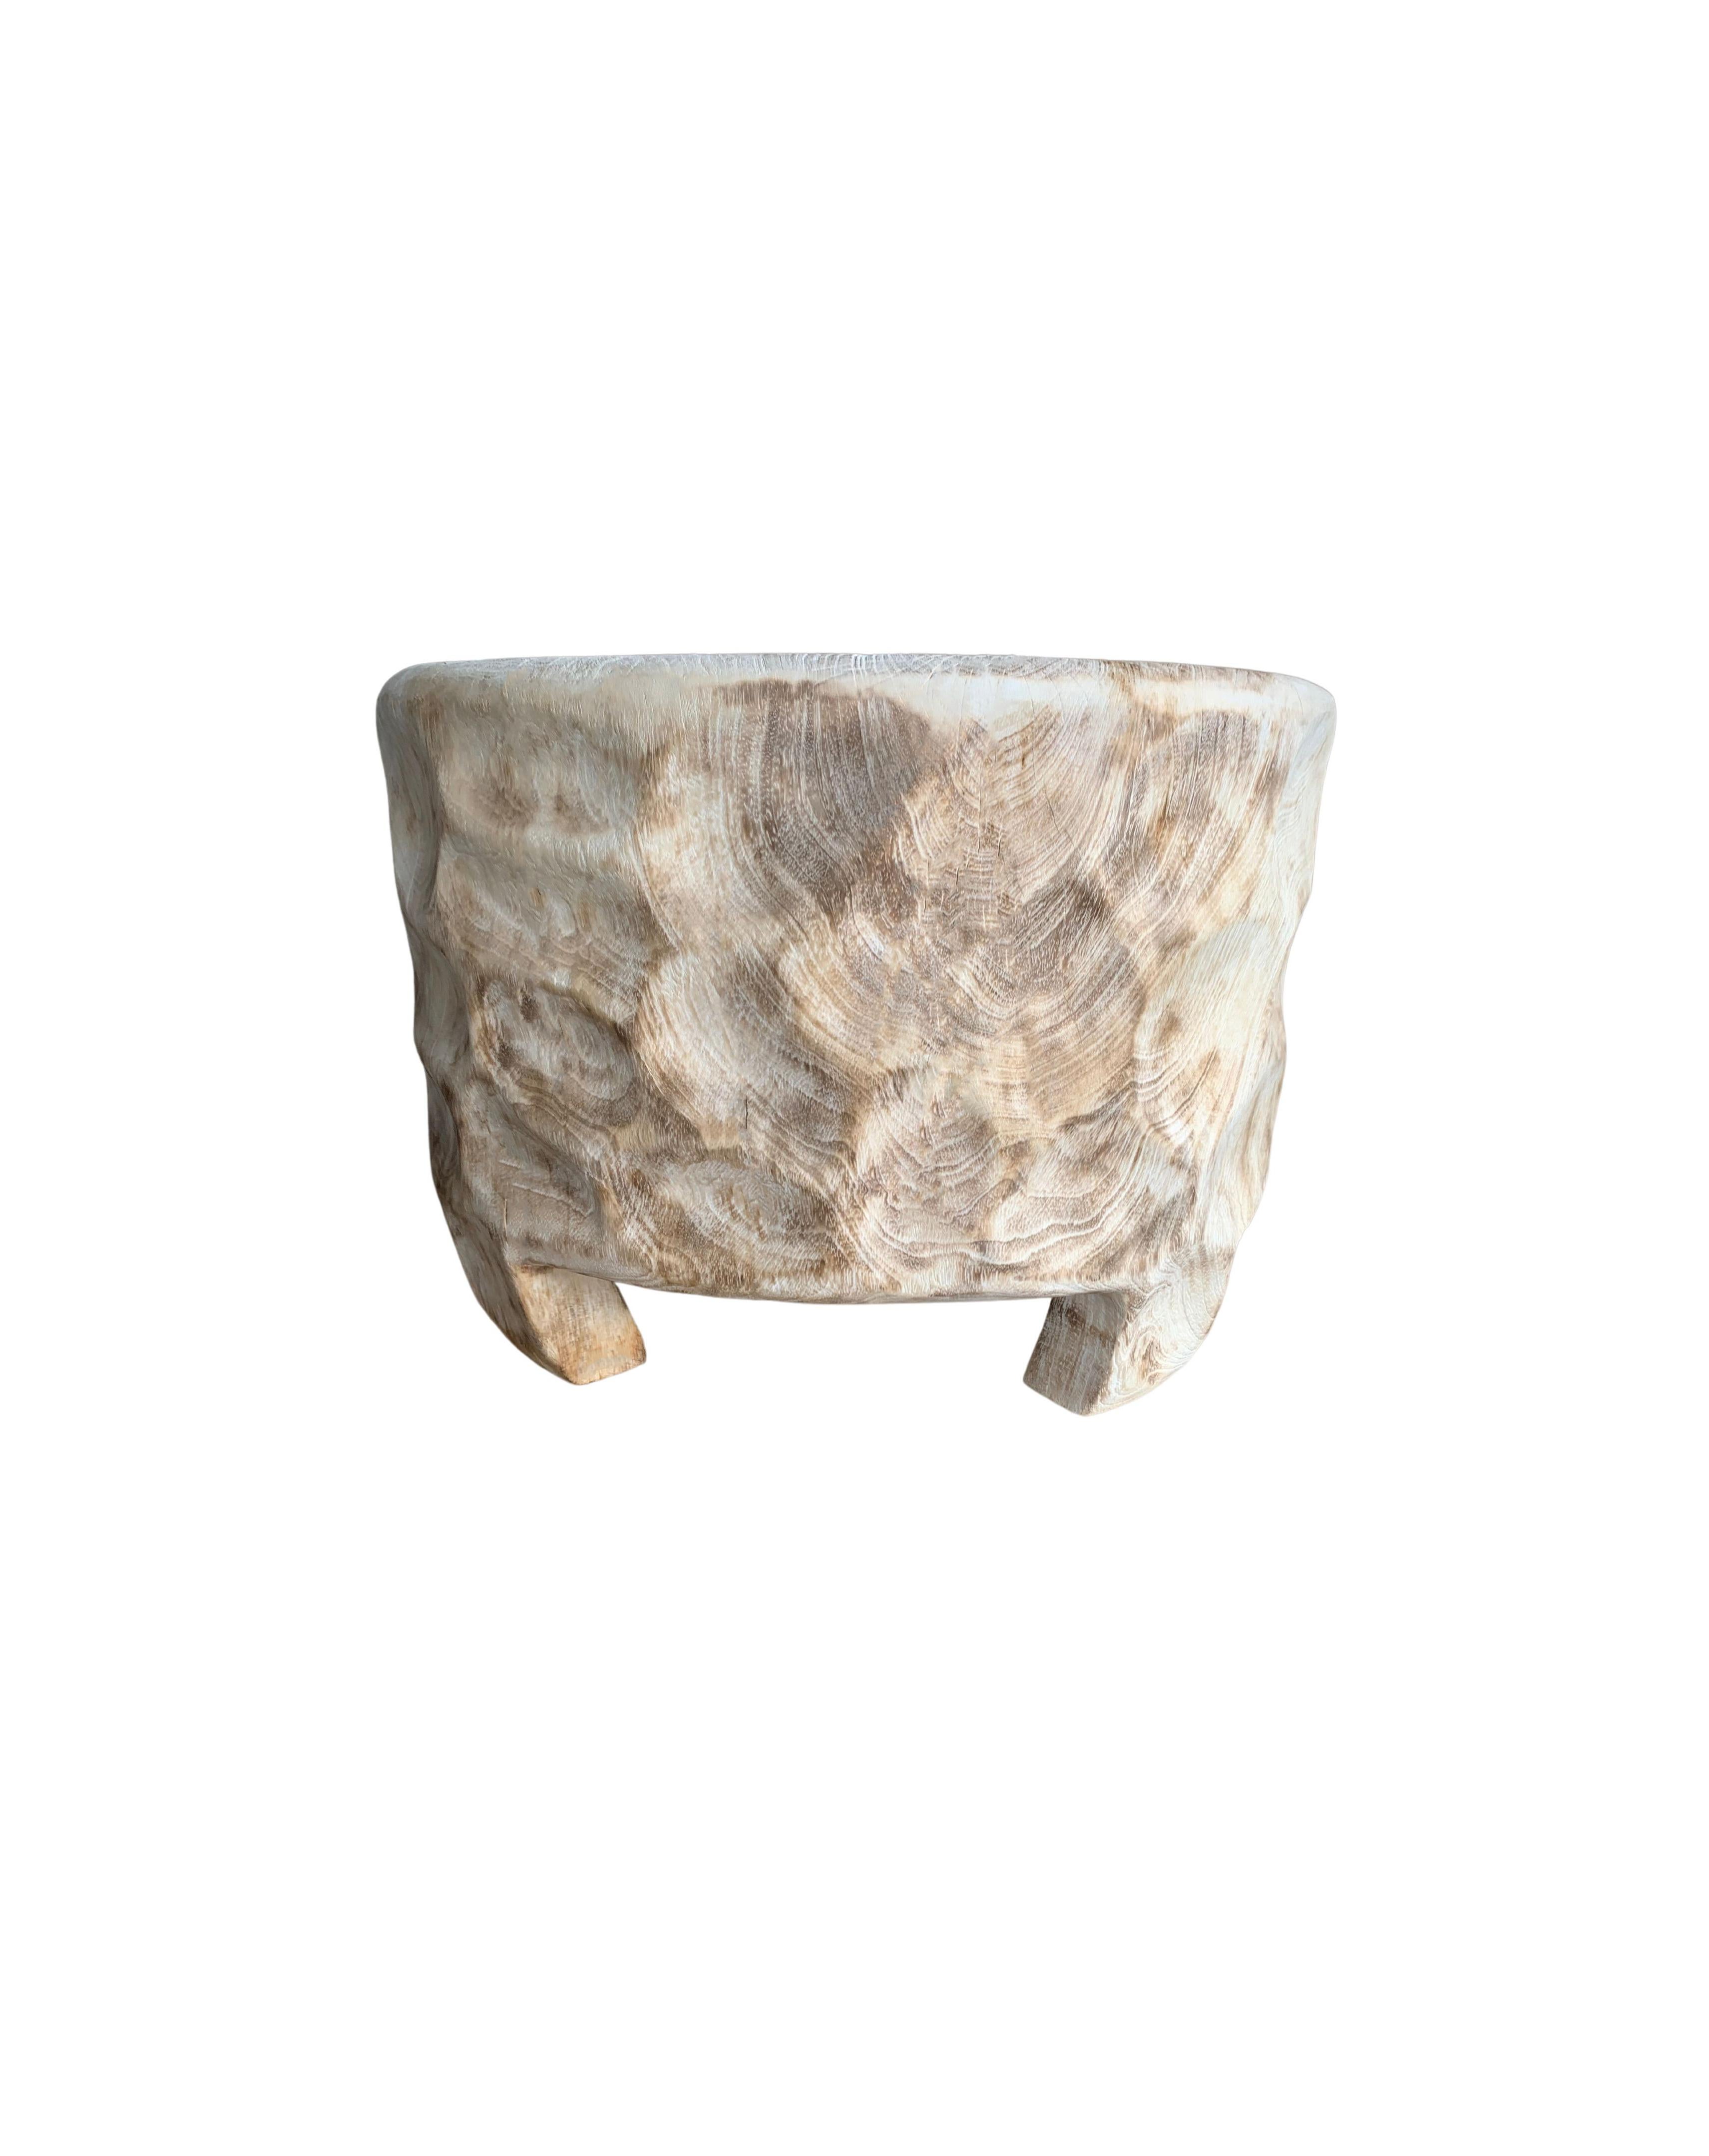 Hand-Crafted Side Table Mango Wood Bleached Finish Hand-Hewn Detailing For Sale